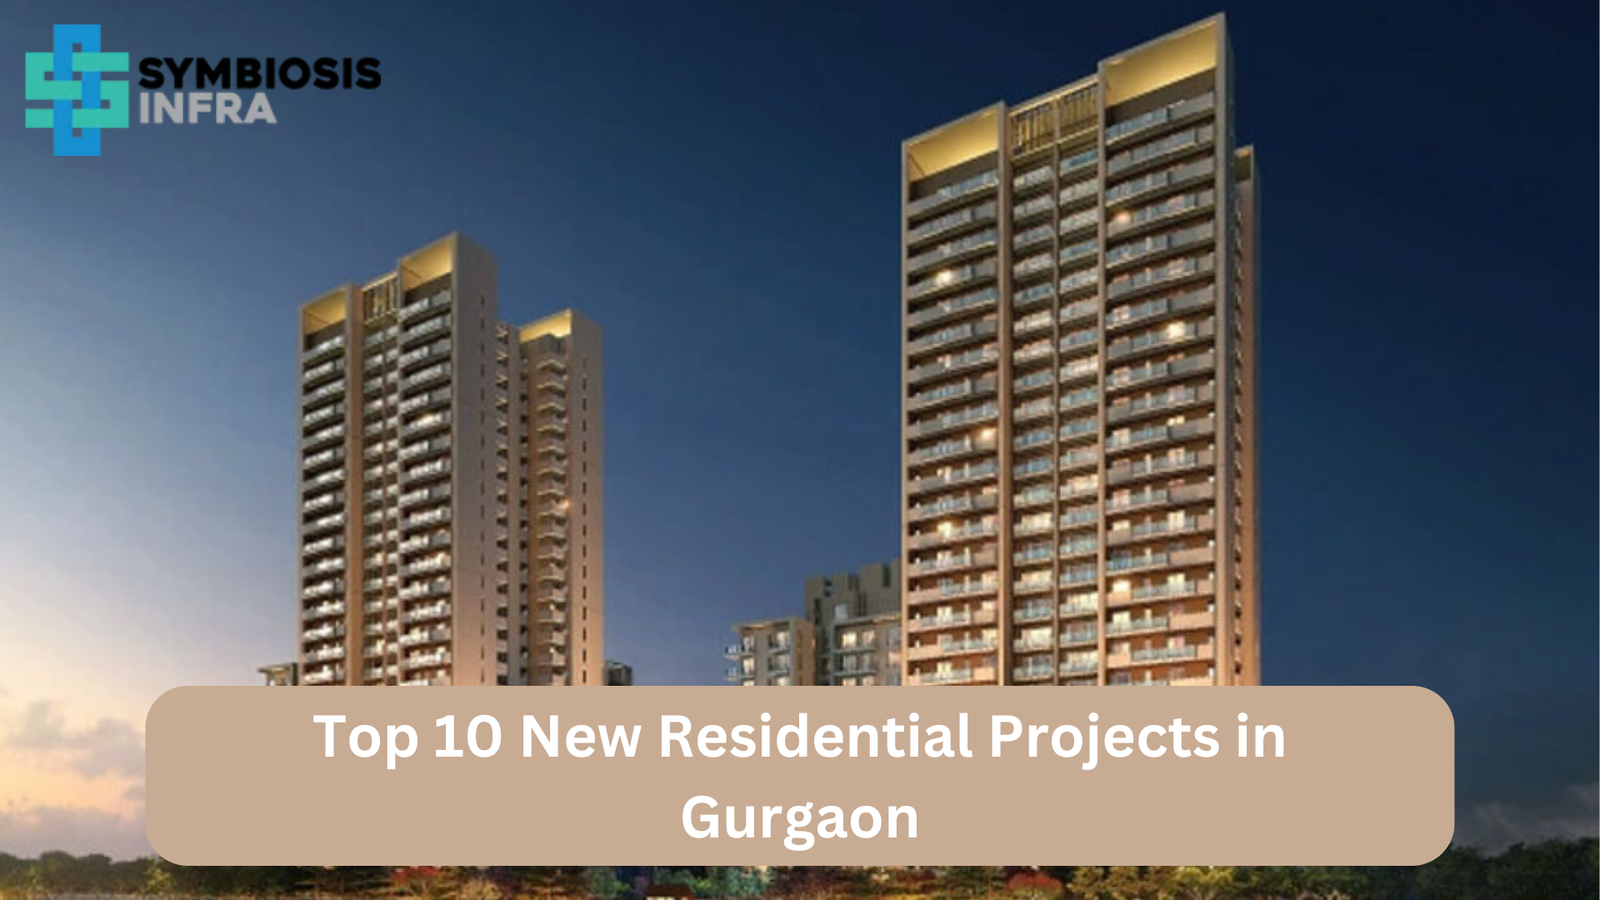 Top 10 New Residential Projects in Gurgaon